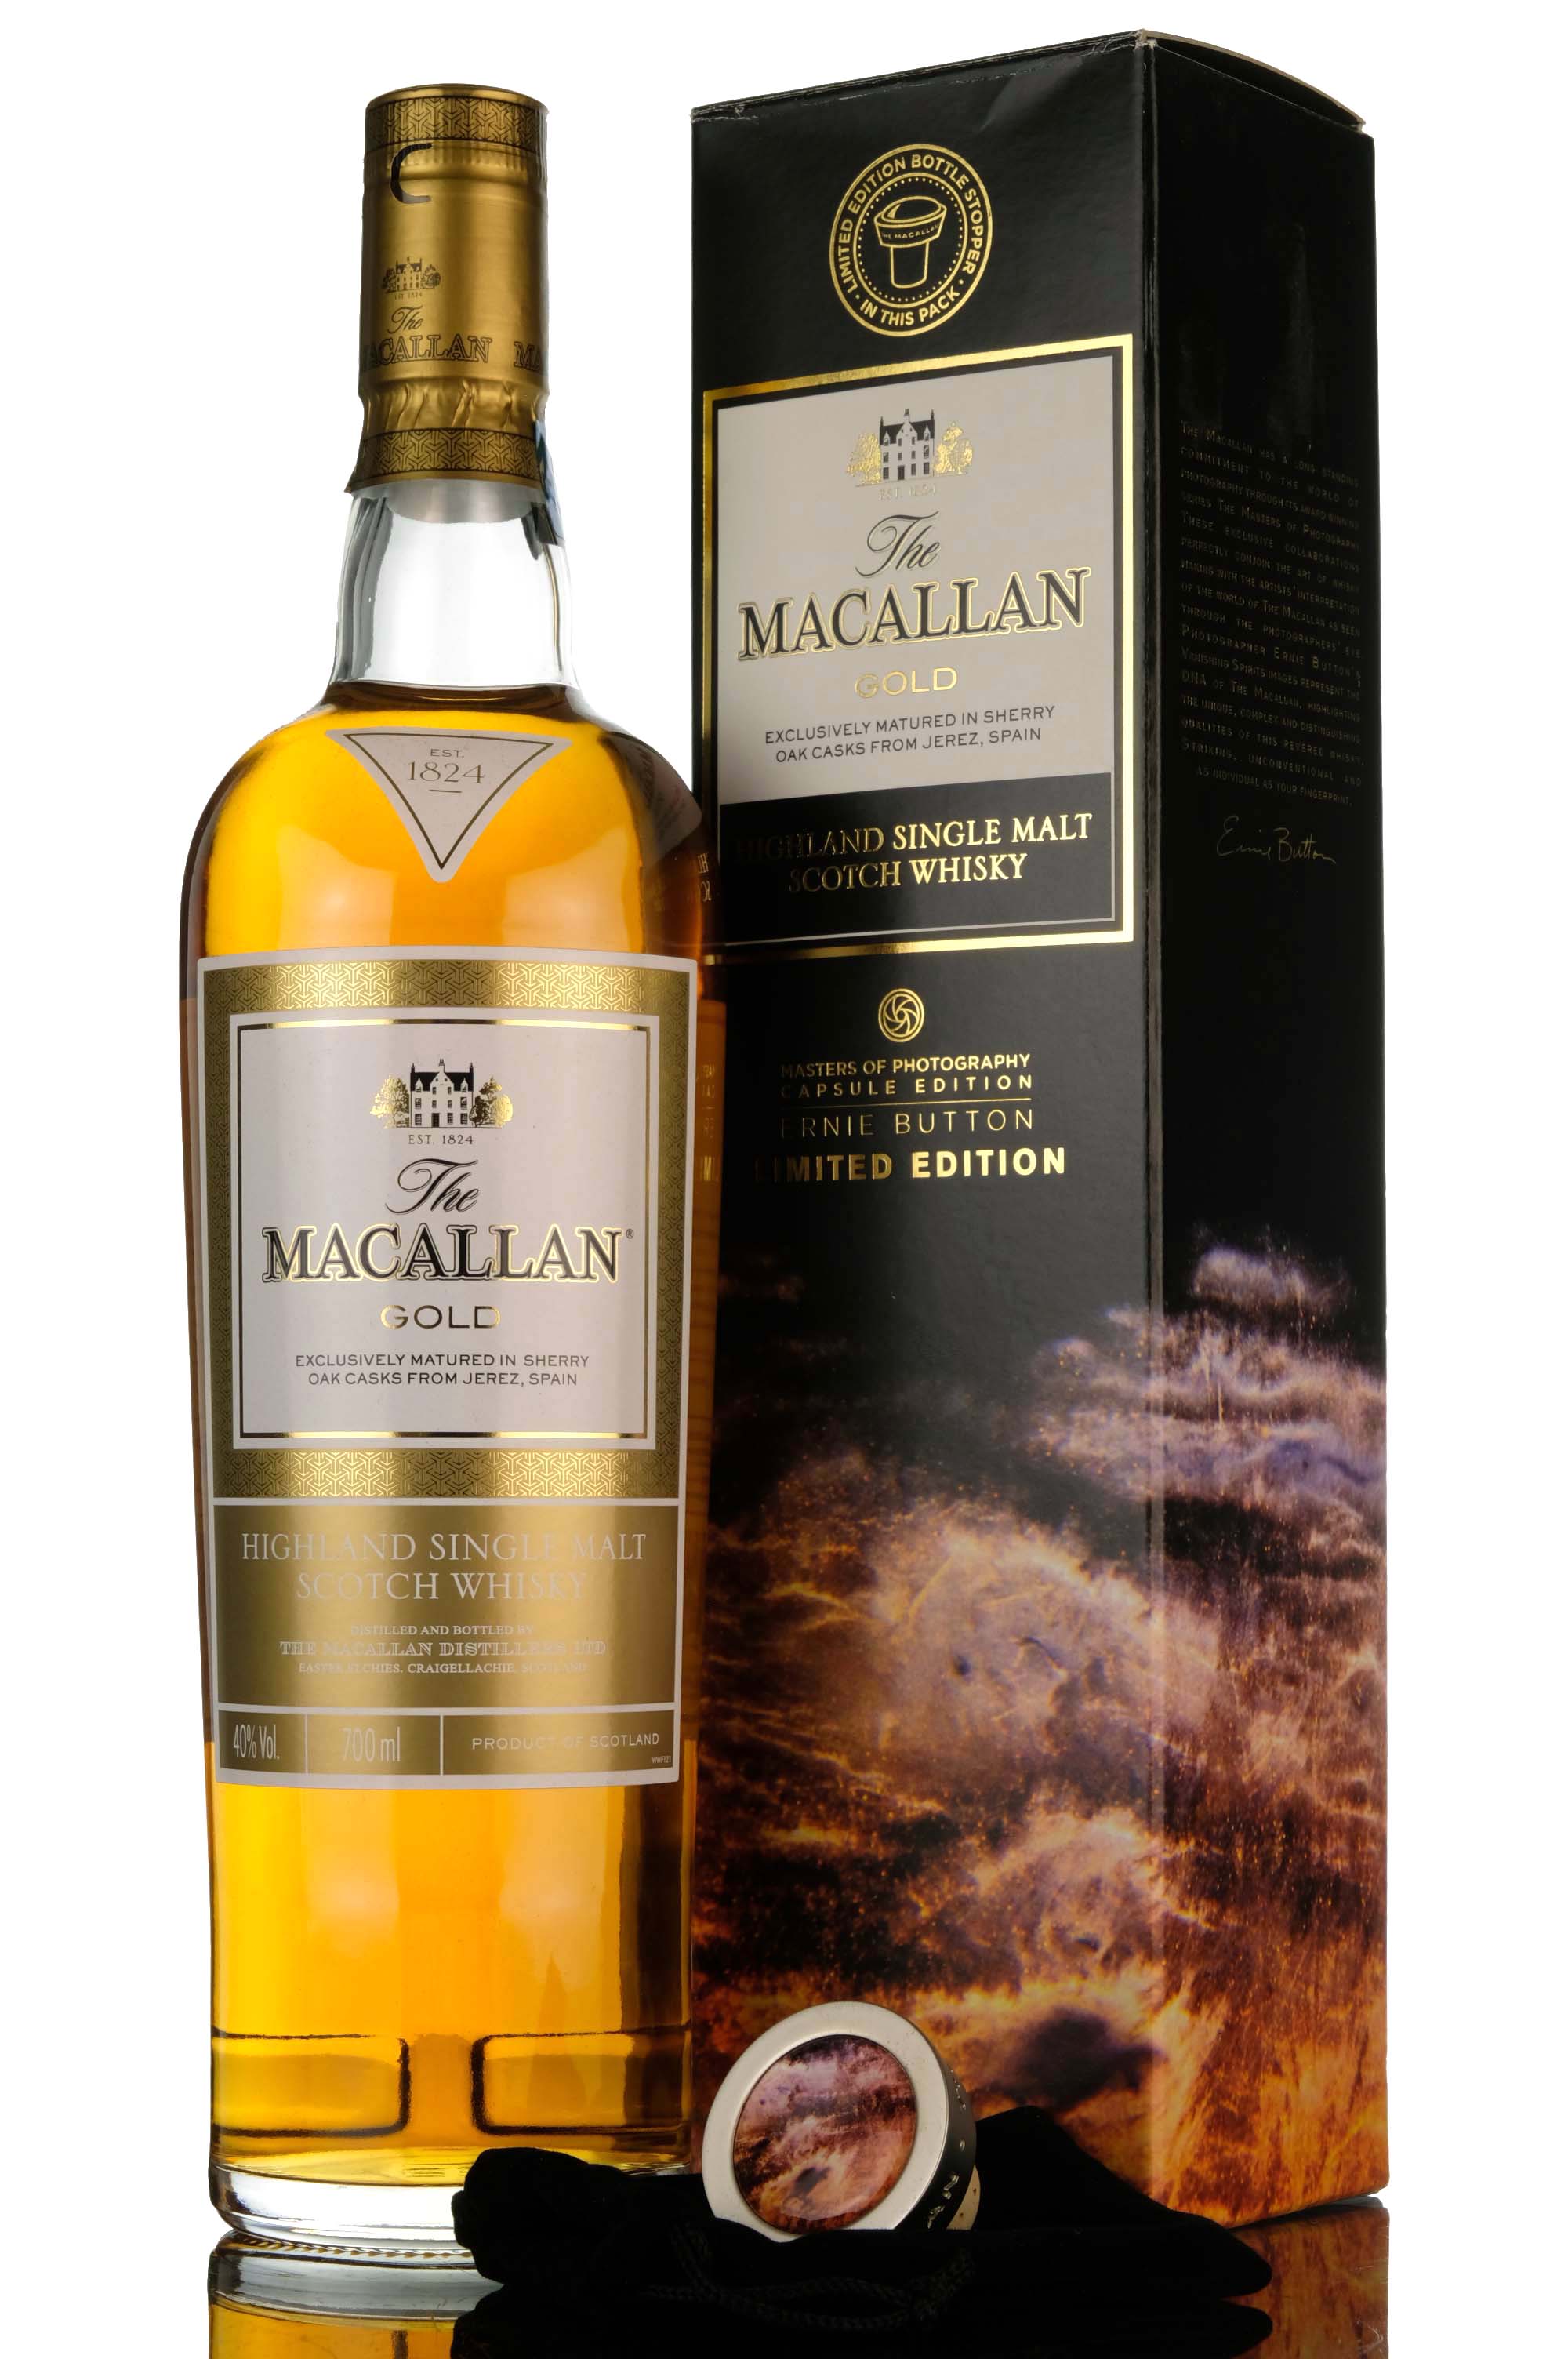 Macallan Gold - Sherry Cask - Masters of Photography Capsule Edition - Ernie Button